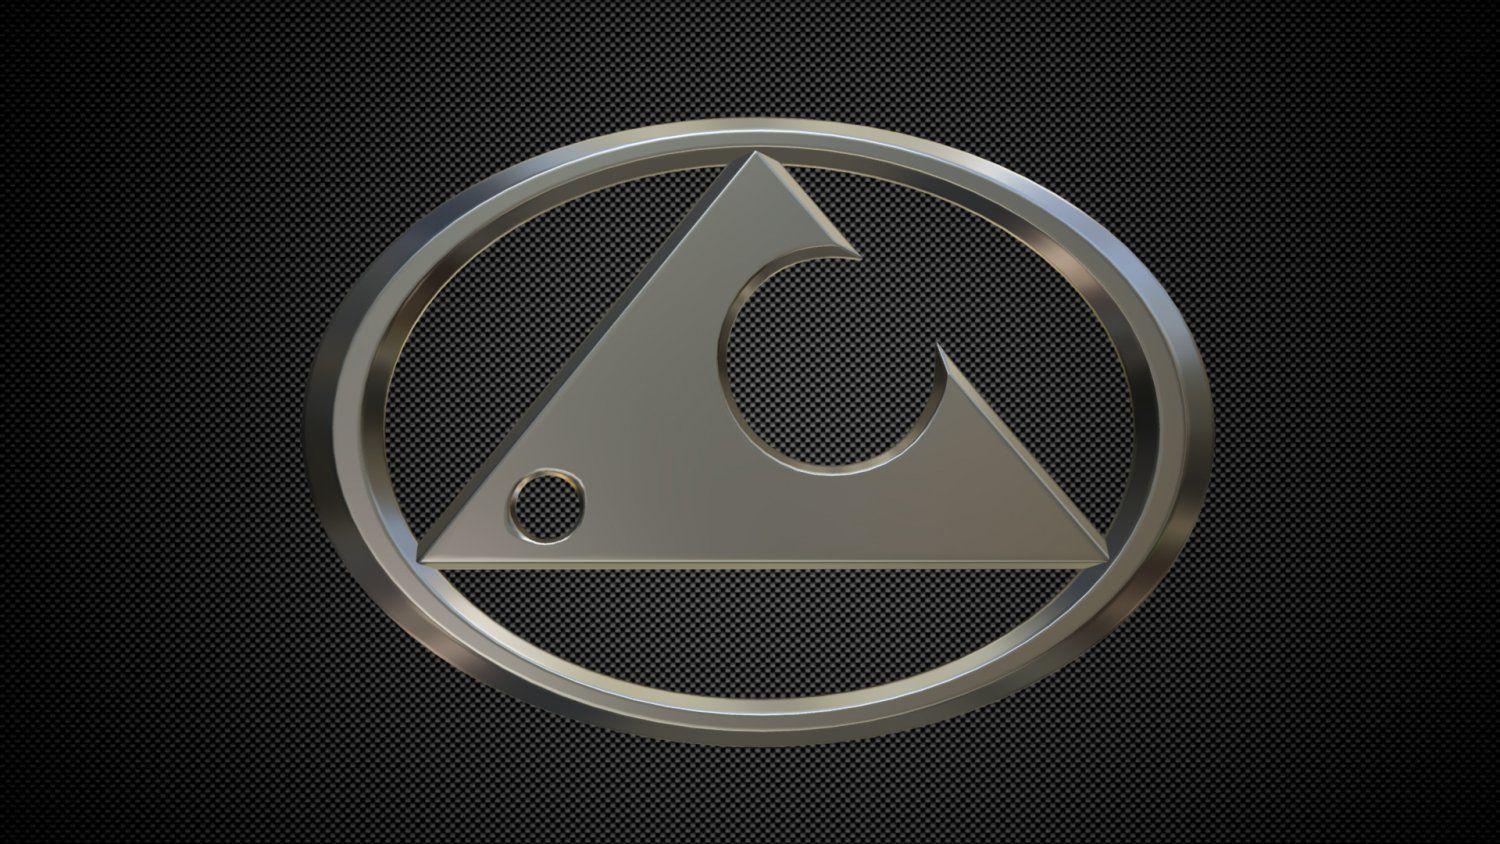 Changfeng Logo - Changfeng logo 3D Model in Parts of auto 3DExport